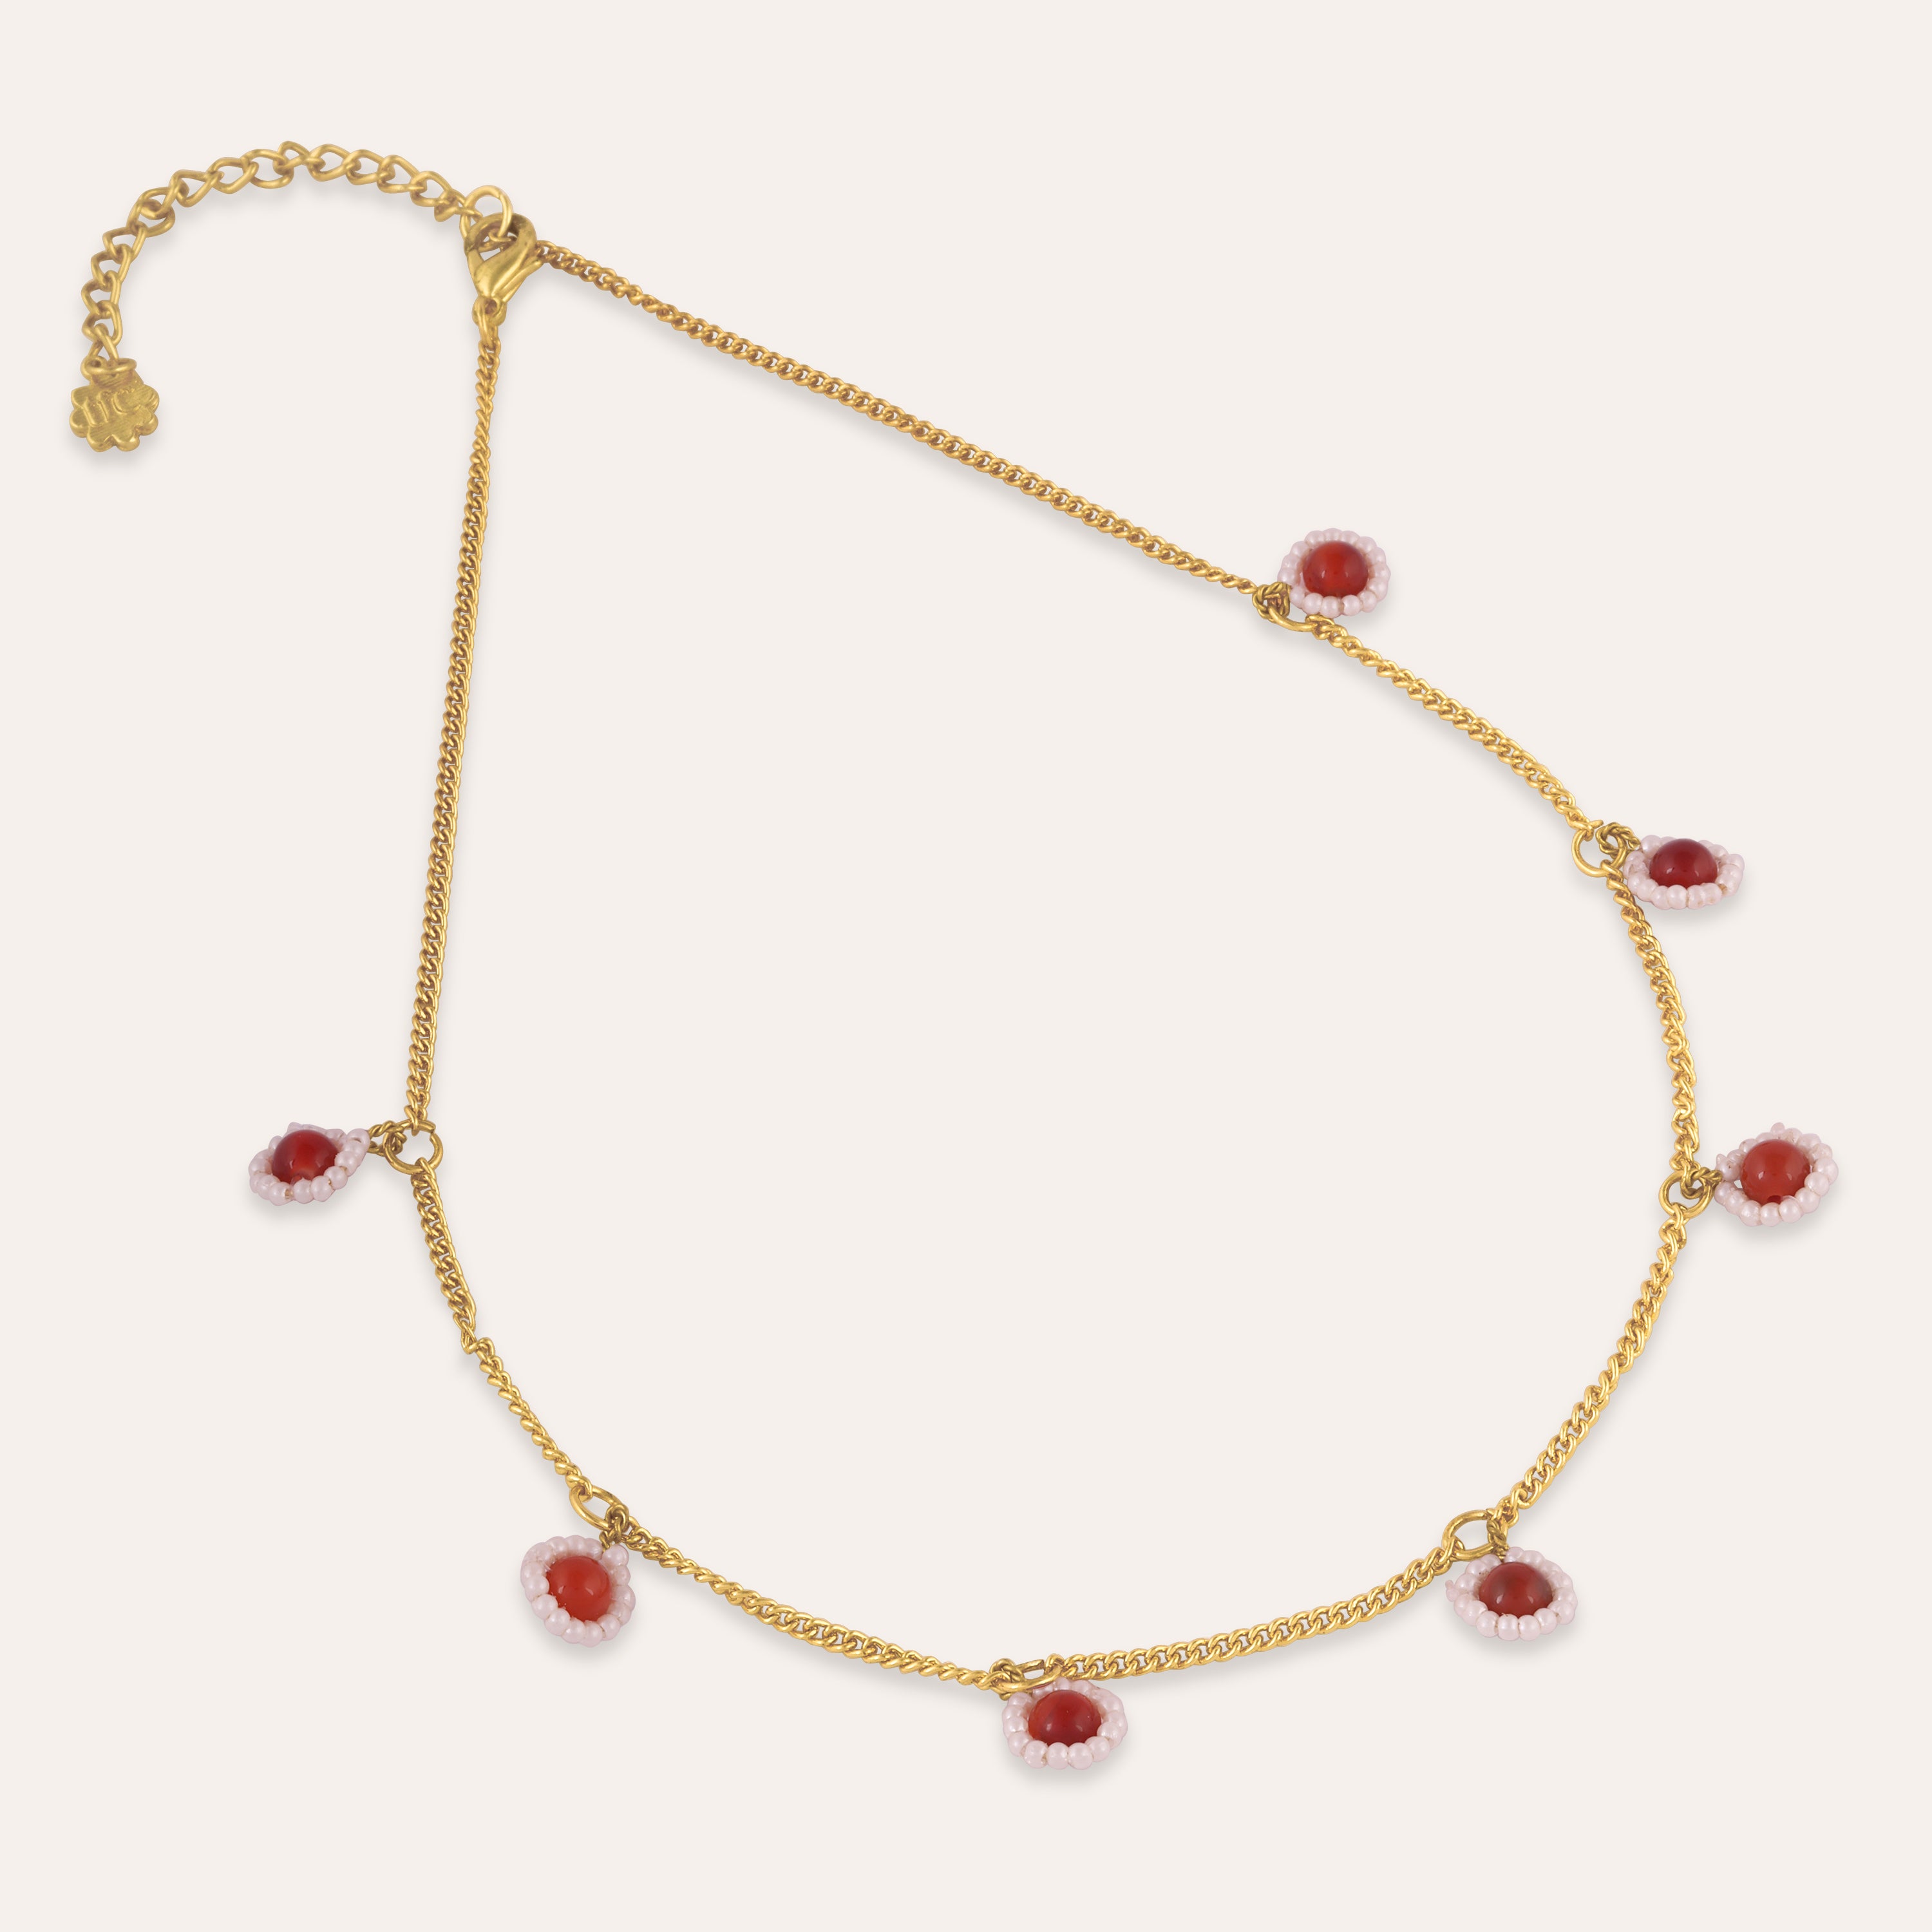 TFC Red Floral Gold Plated Necklace-Enhance your elegance with our collection of gold-plated necklaces for women. Choose from stunning pendant necklaces, chic choker necklaces, and trendy layered necklaces. Our sleek and dainty designs are both affordable and anti-tarnish, ensuring lasting beauty. Enjoy the cheapest fashion jewellery, lightweight and stylish- only at The Fun Company